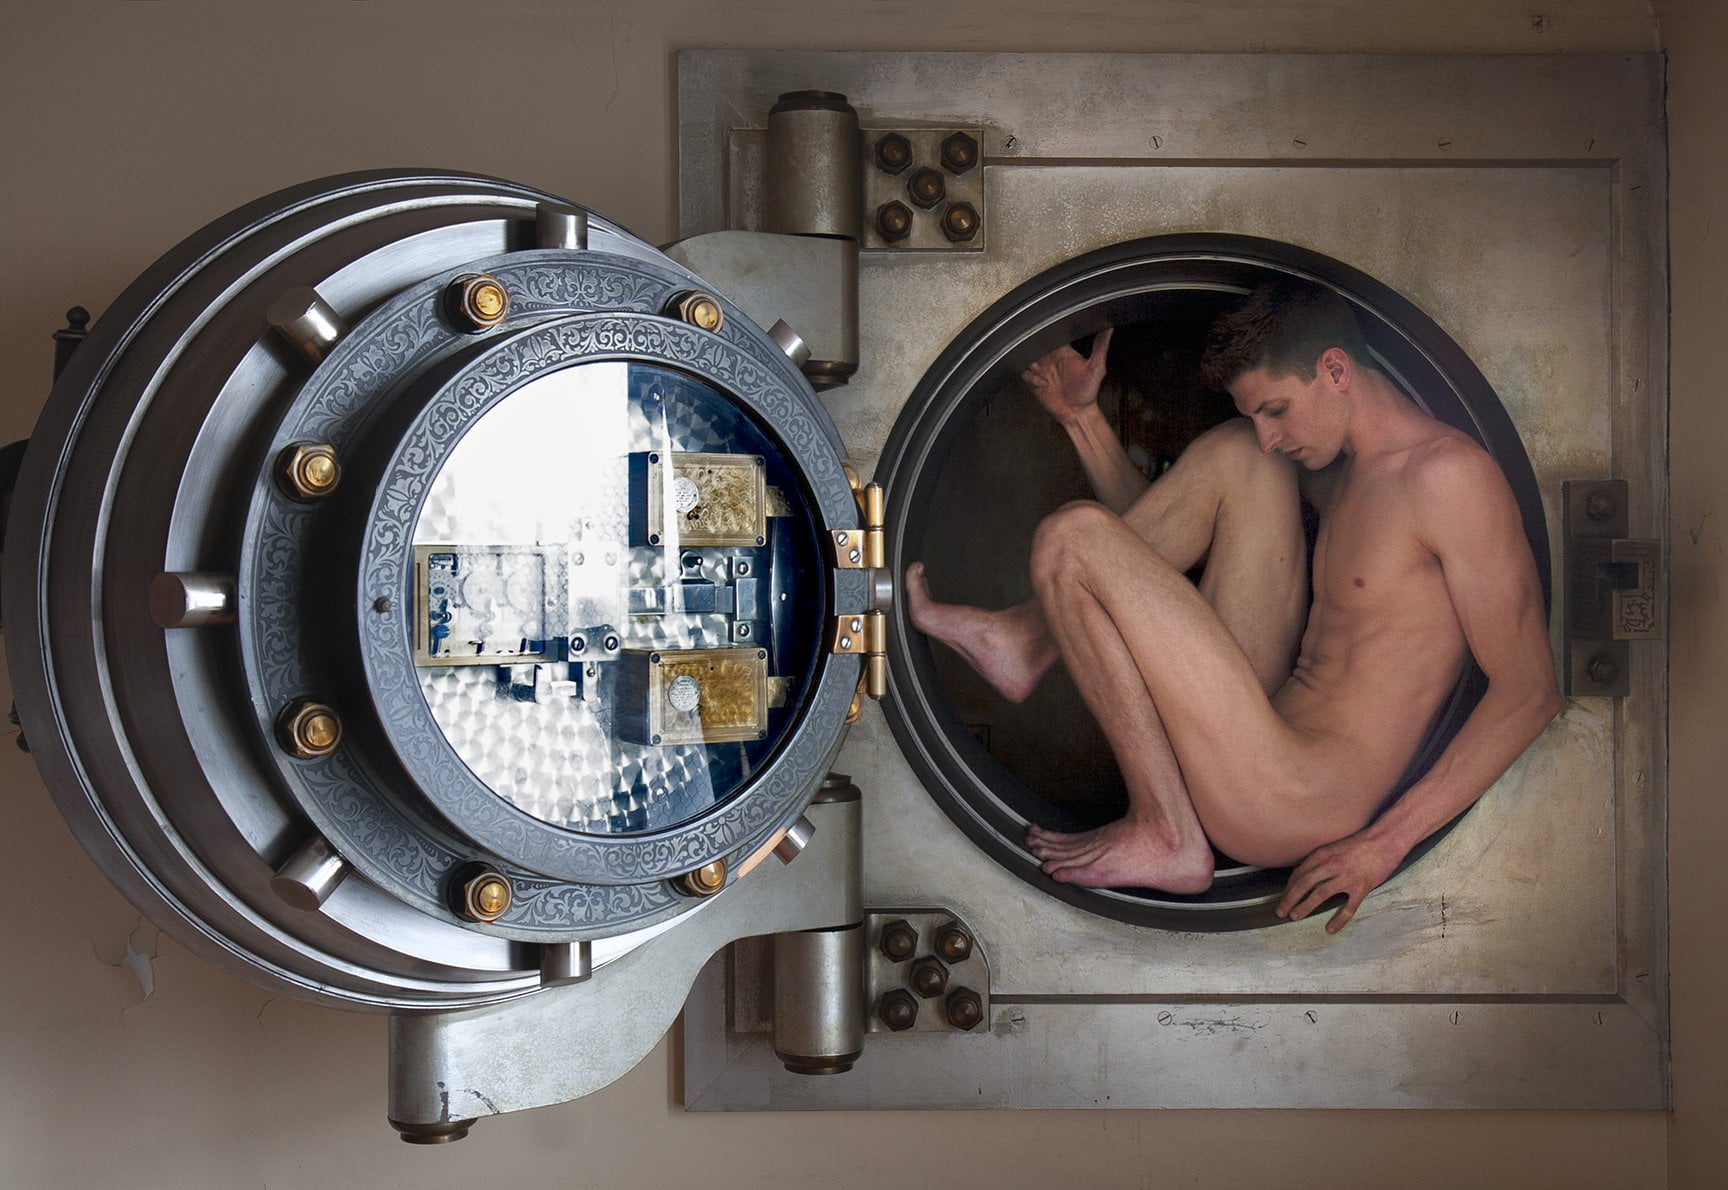 Nude male curled up in small bank vault opening